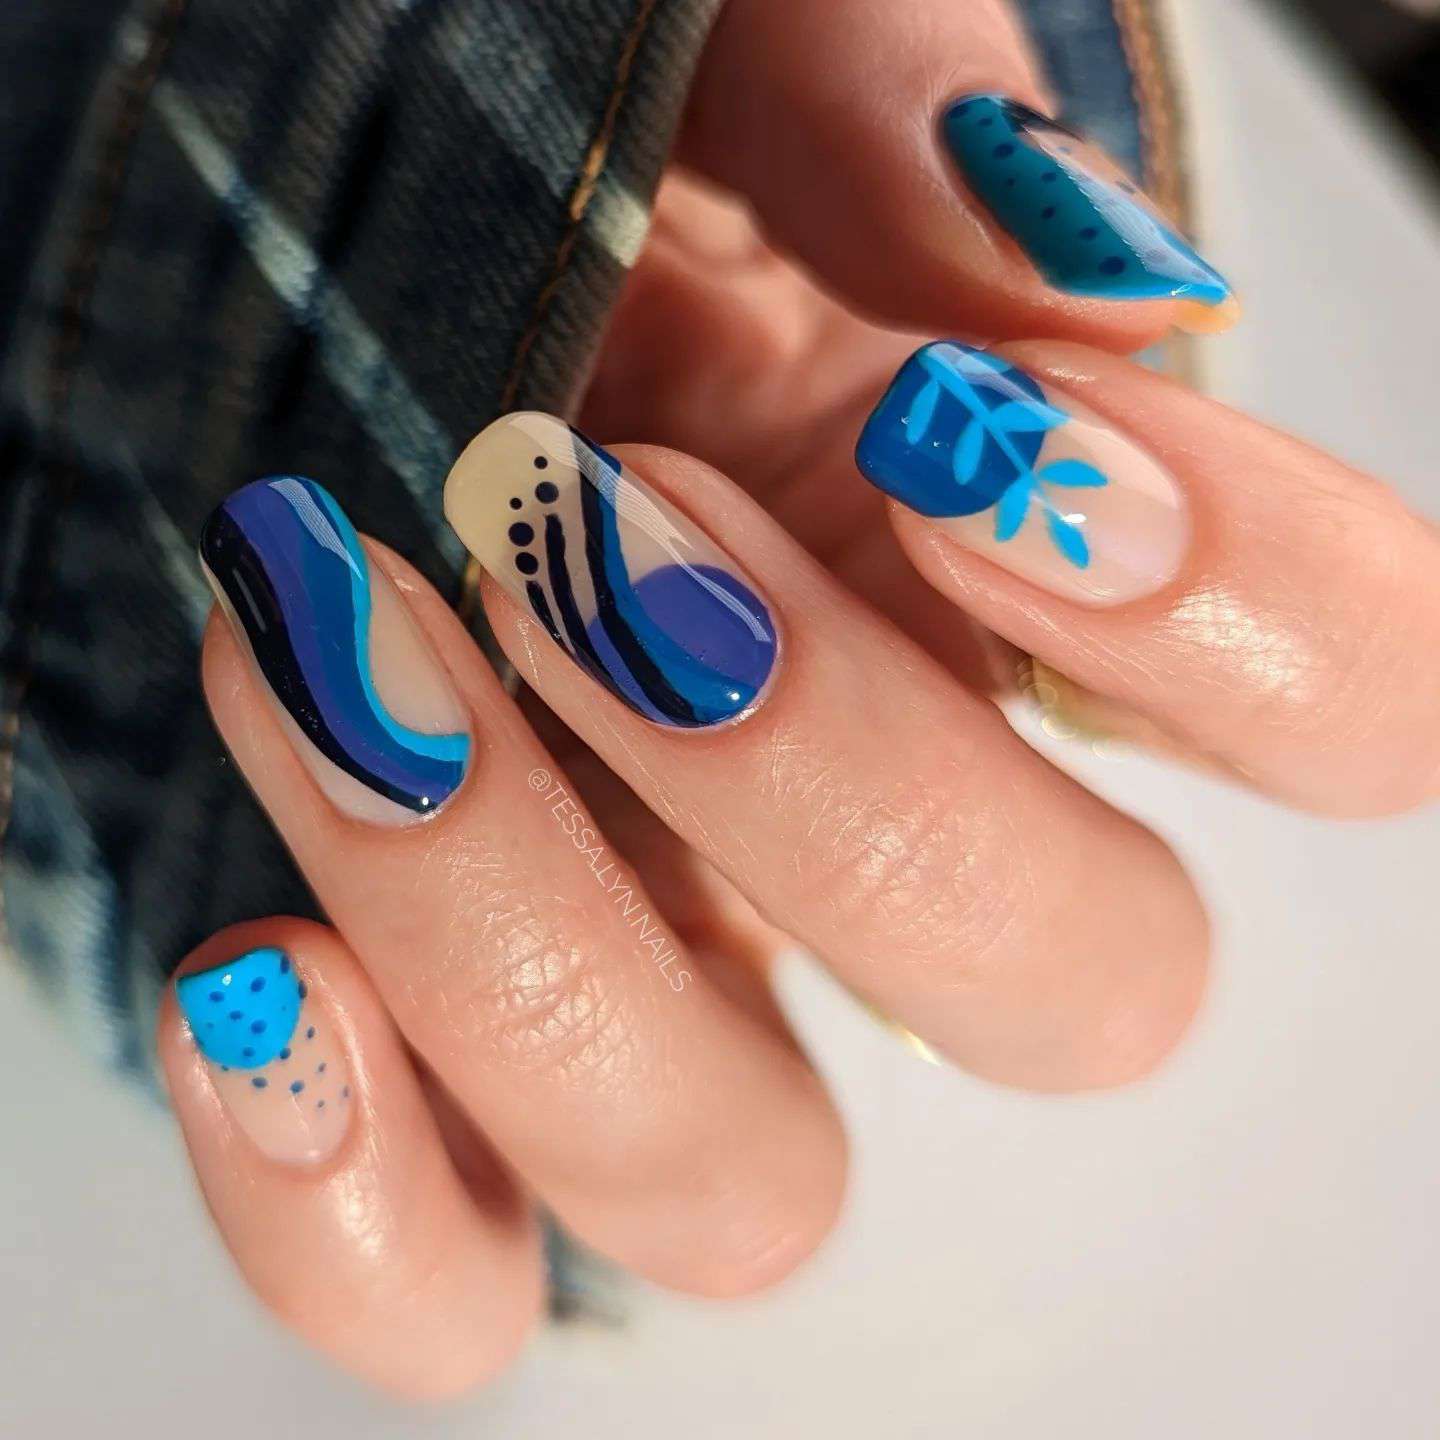 100+ Must Try Fall Nail Art Designs And Nail Ideas images 78